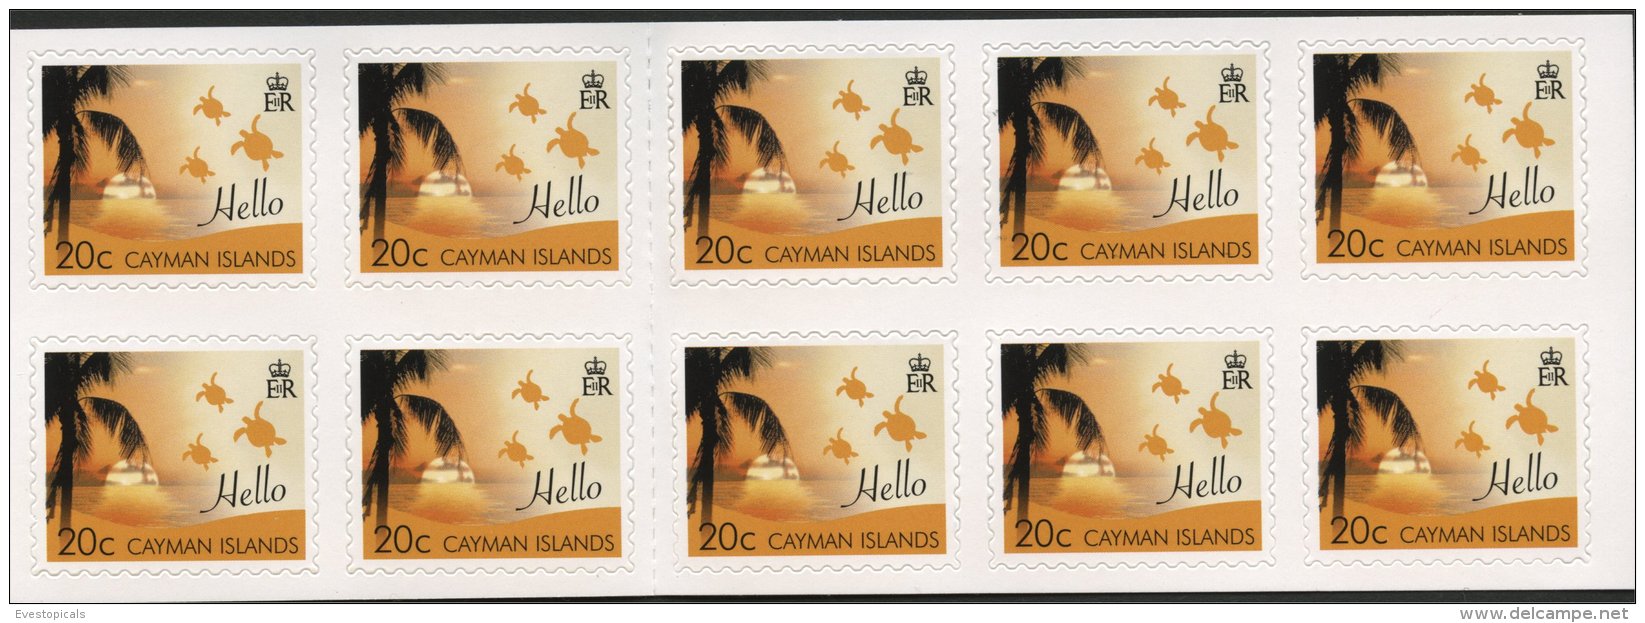 CAYMAN ISLANDS GREETING STAMPS FULL SET BOOKLETS 2008 - Cayman (Isole)